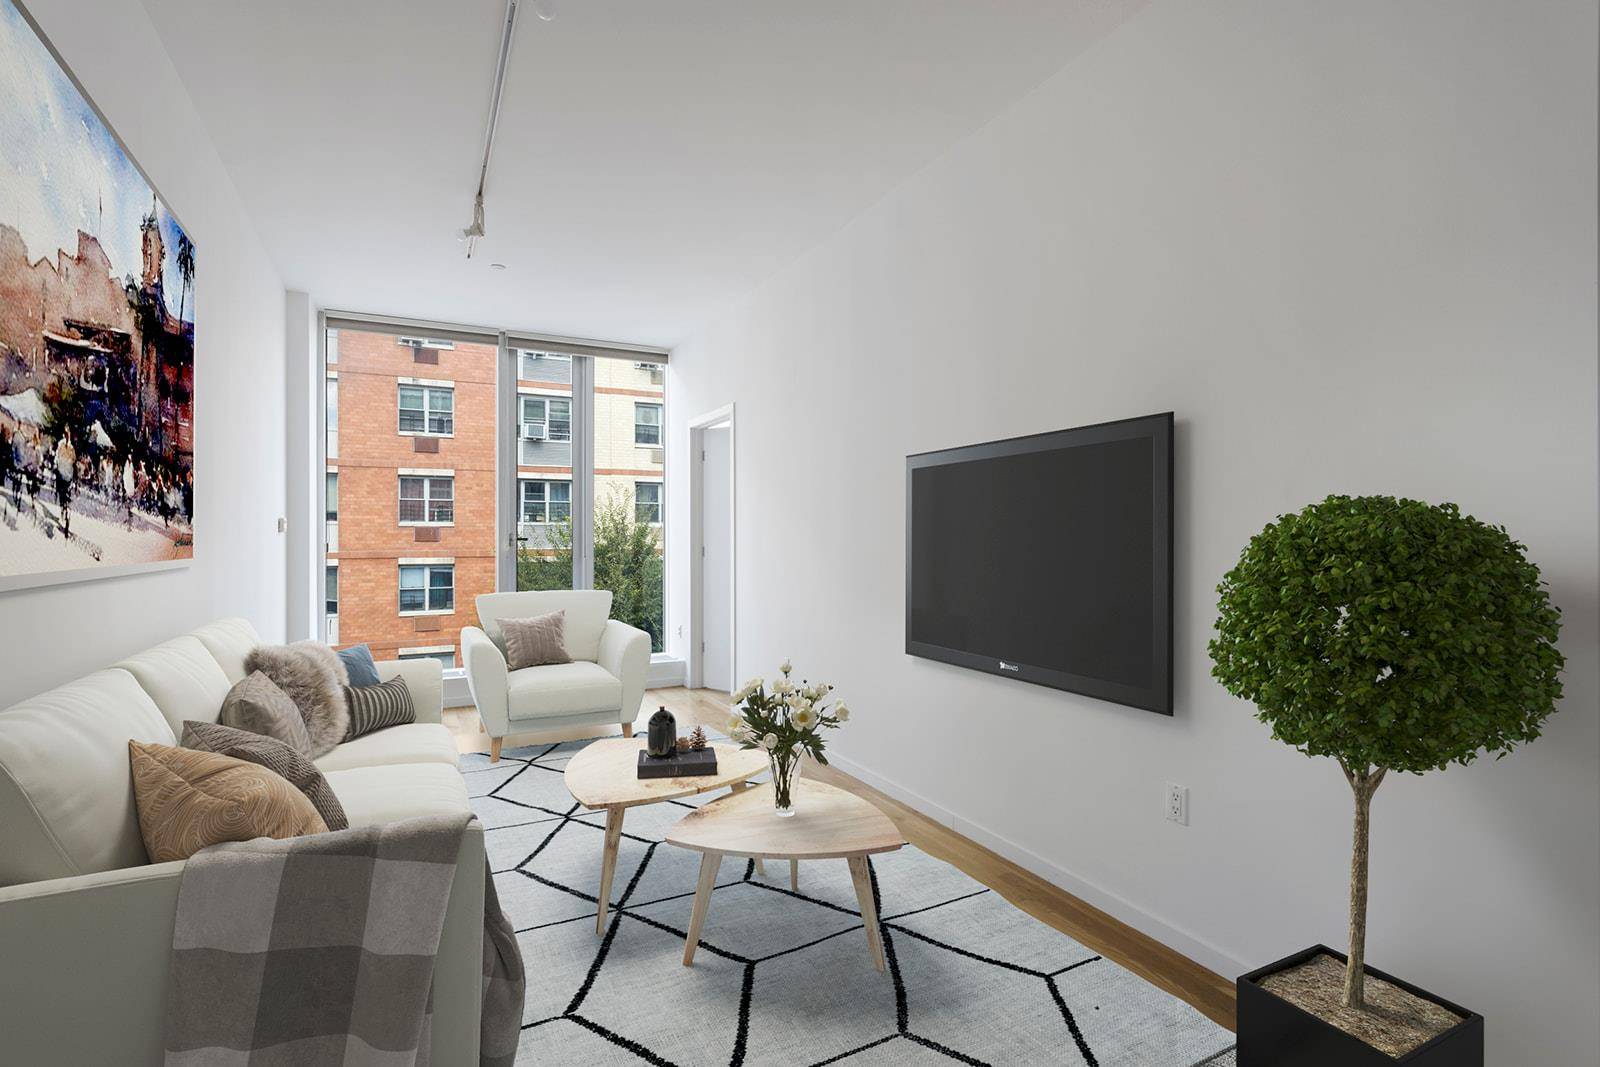 With just two units per floor, this gloriously bright and open 1br condo at Casa Brava features stunning ceiling to floor windows and a sprawling floorplan.